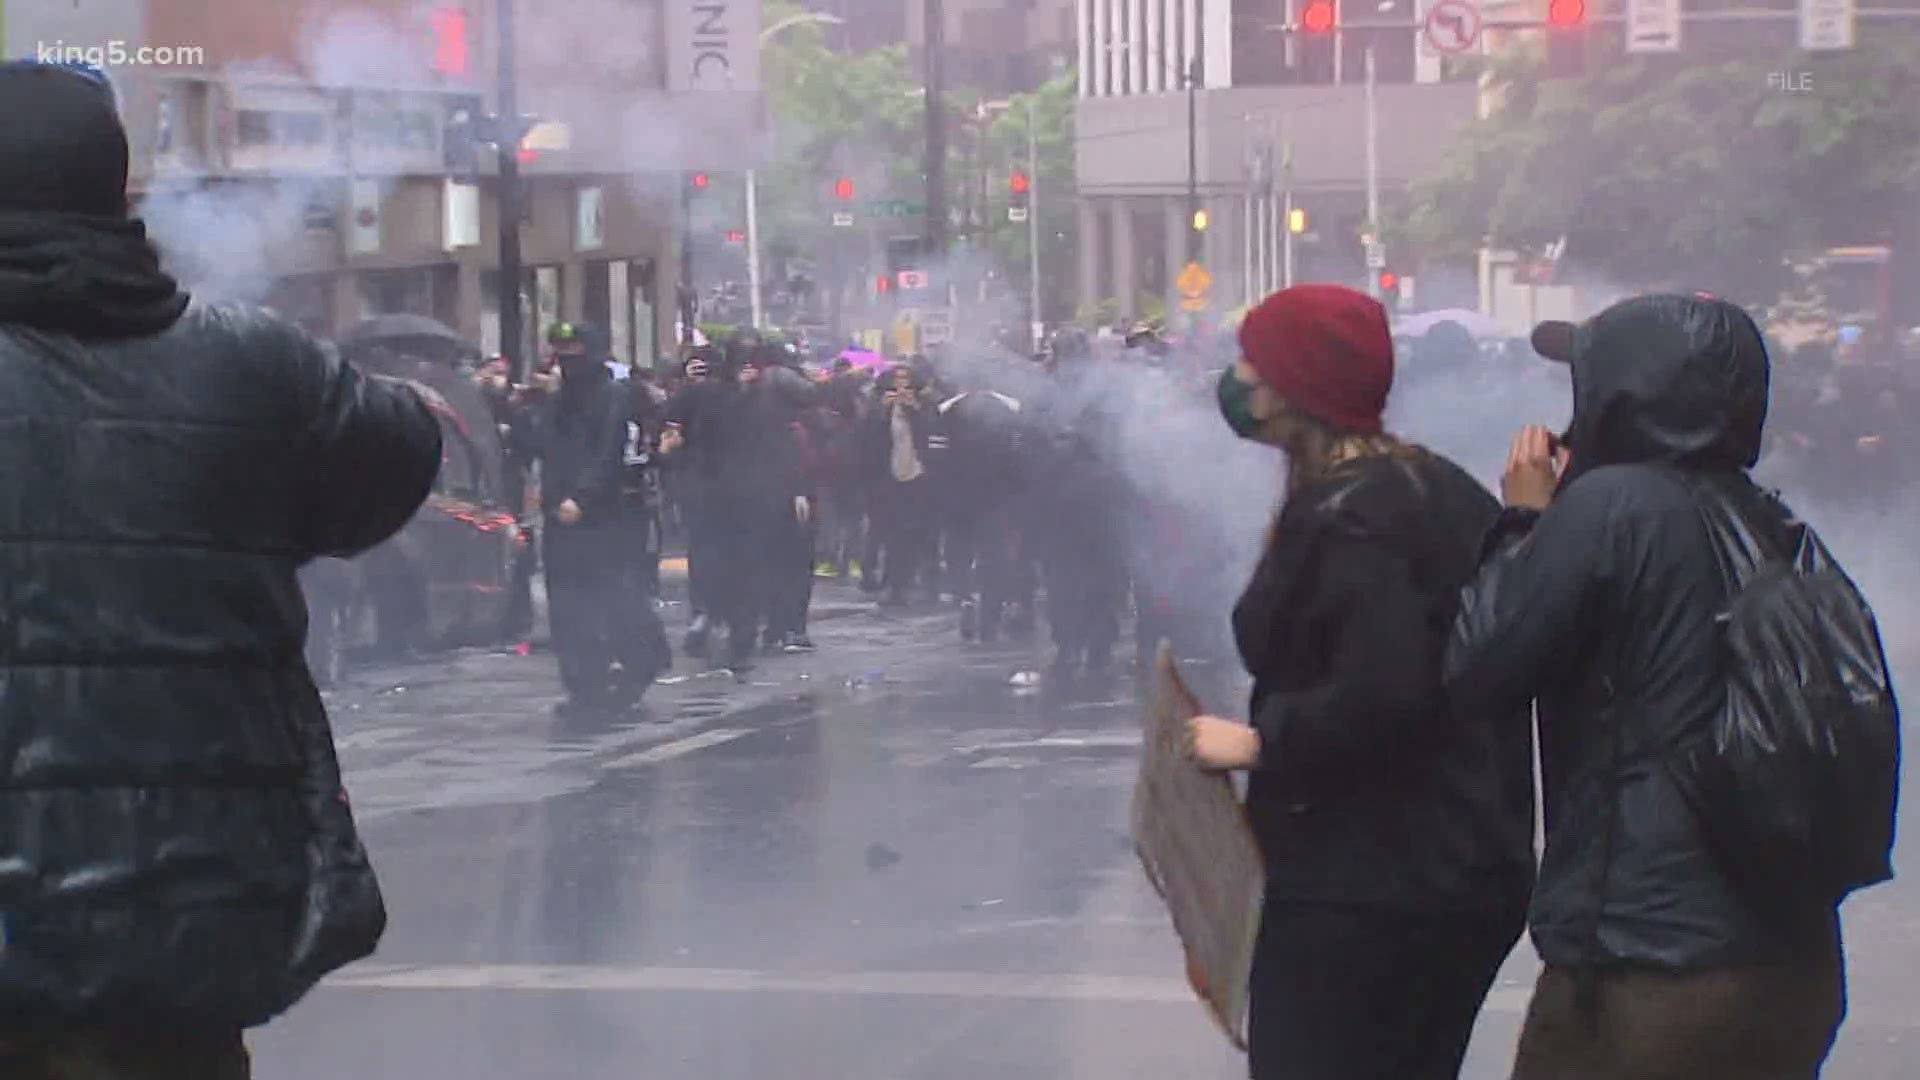 At least a dozen protesters have filed claims with the city of Seattle, King County and Washington state over excessive police force during George Floyd protests.